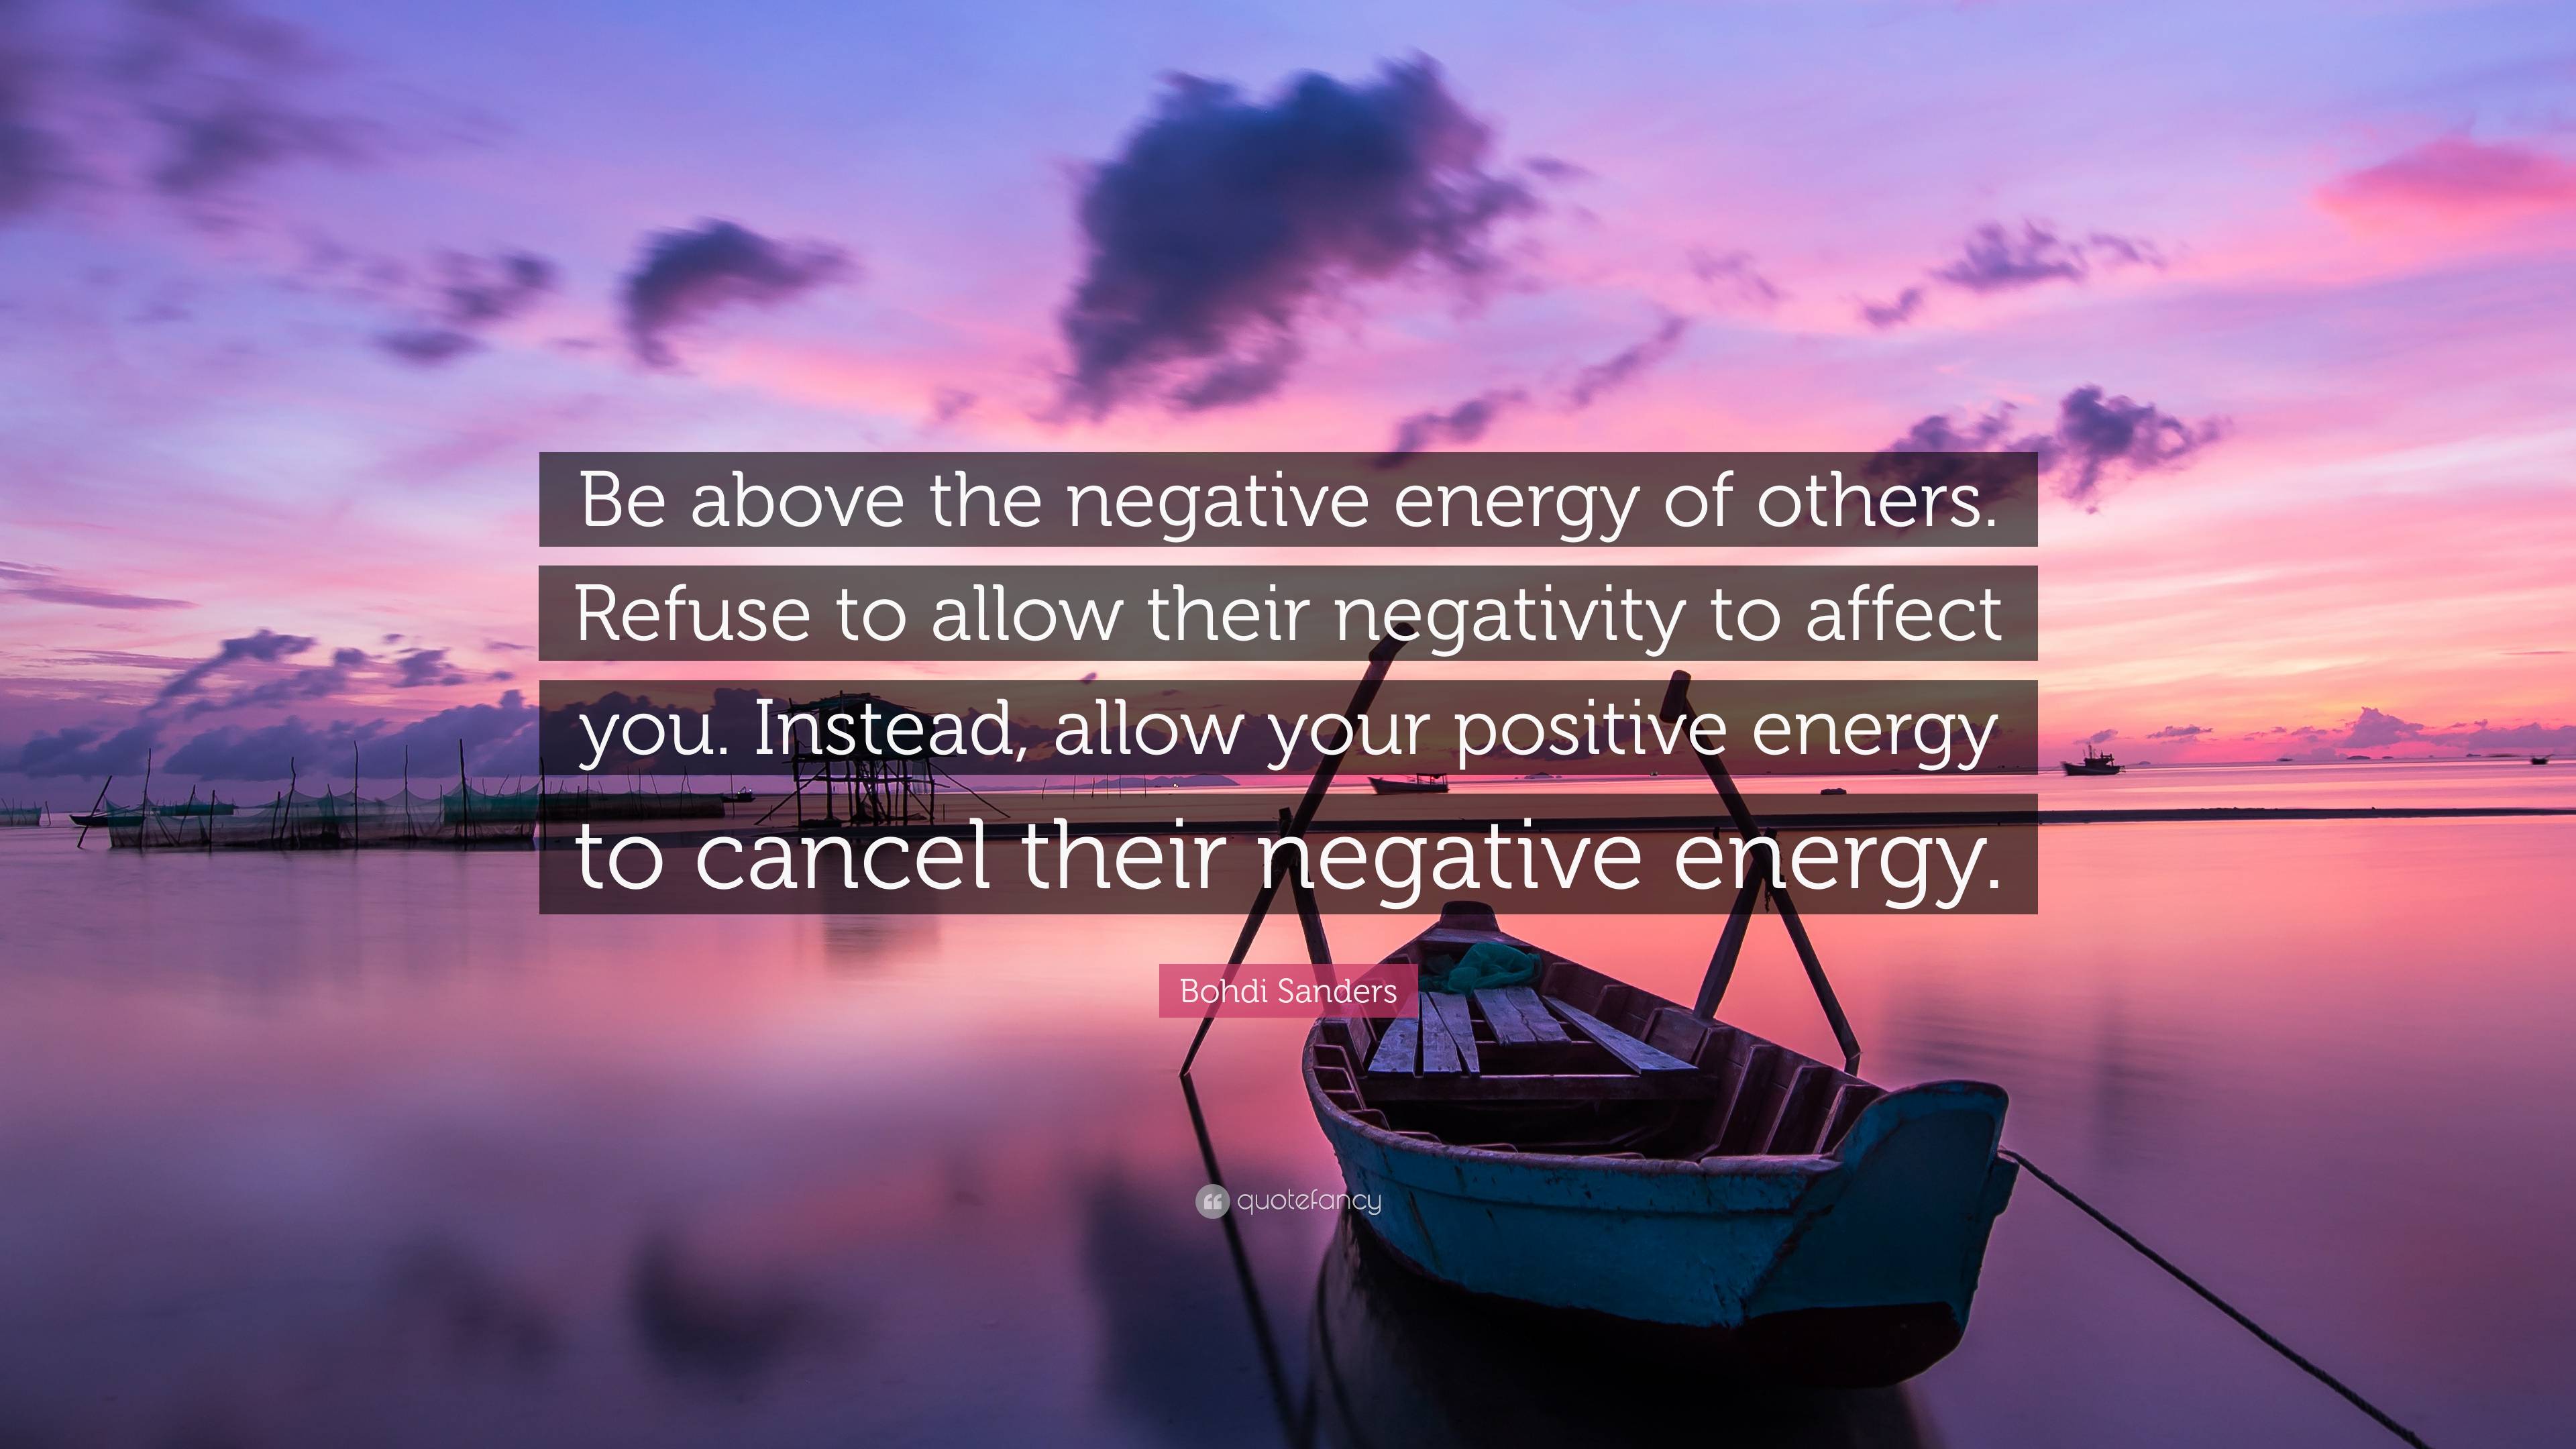 Bohdi Sanders Quote: “Be above the negative energy of others. Refuse to ...